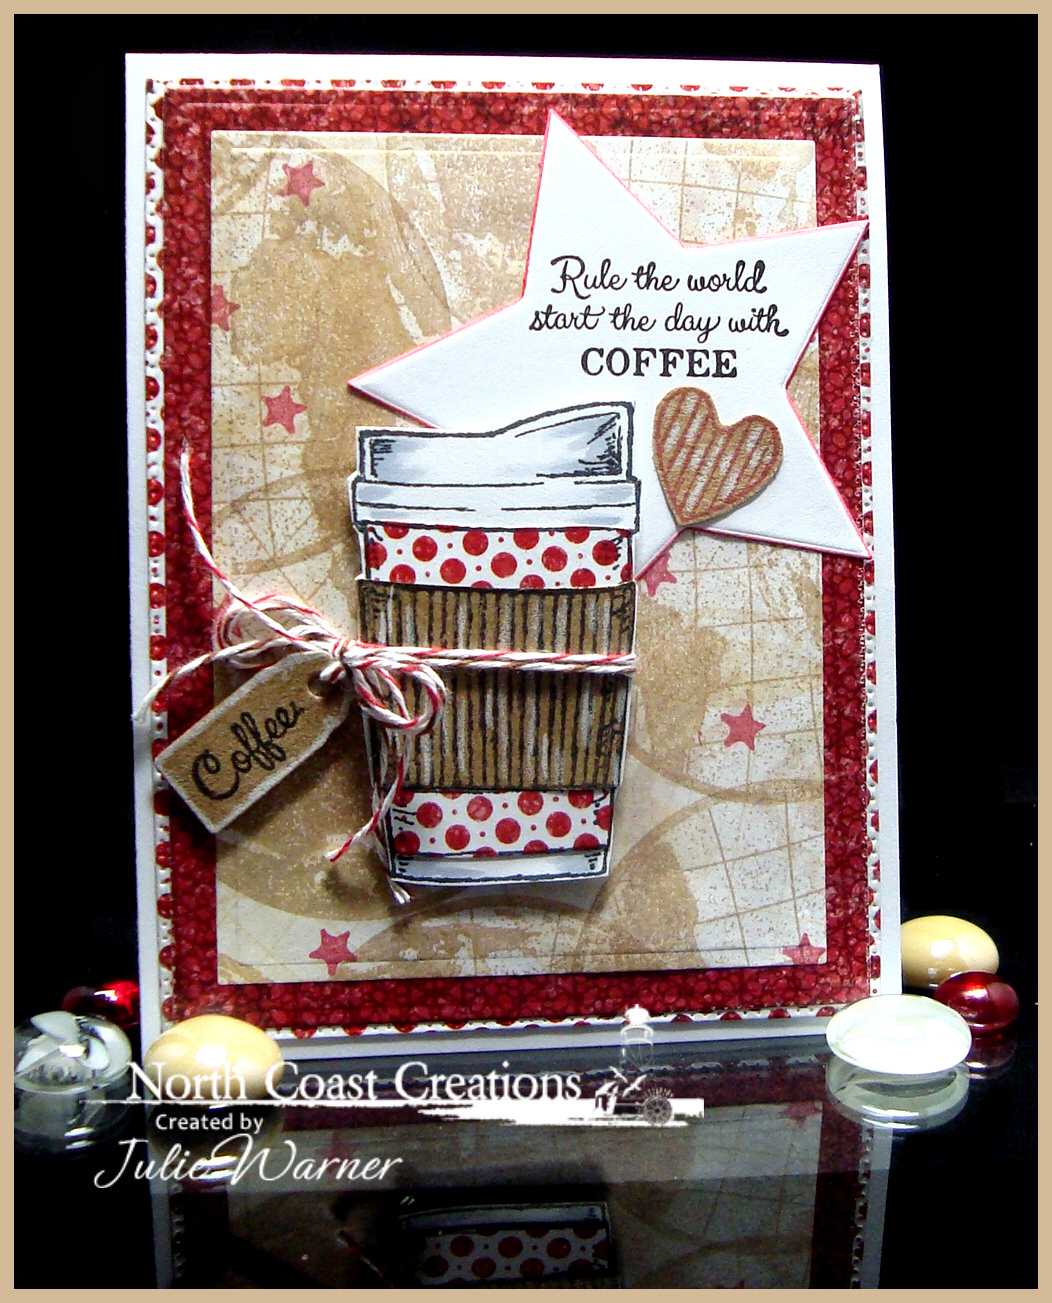 Stamps - North Coast Creations Warm My Heart, What’s Brewin'?, Our Daily Bread Designs The Earth, Shine On, Custom Sparkling Stars Dies, Custom Flourished Star Pattern Die, Custom Mini Tags Dies, Patriotic Paper Collection